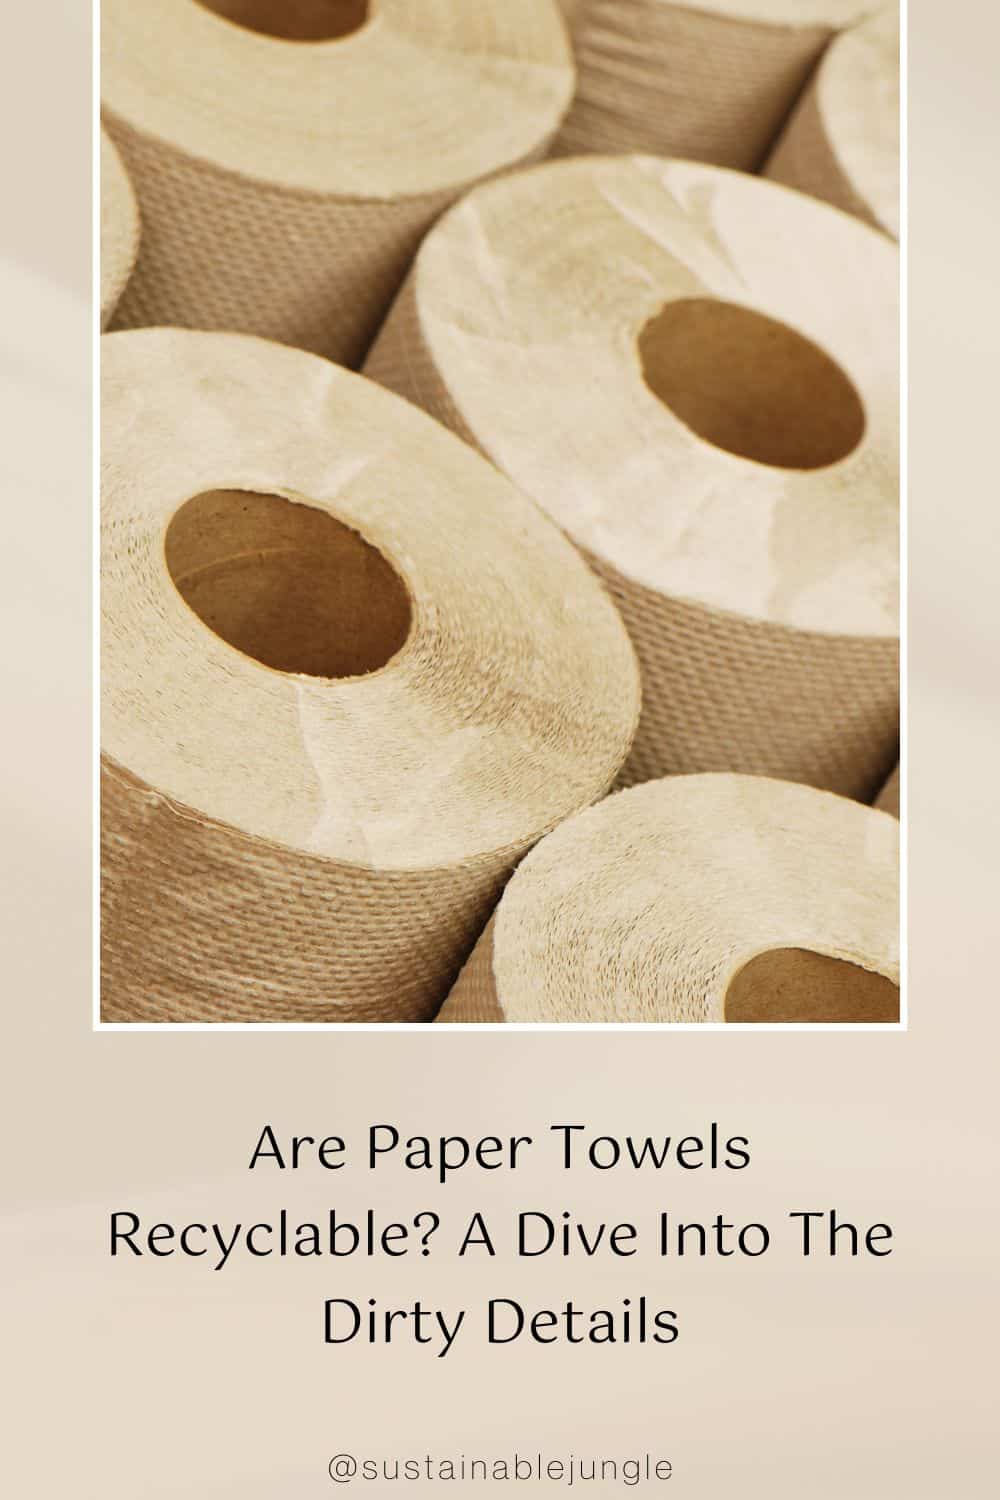 Are Paper Towels Recyclable? A Dive Into The Dirty Details Image by EasyBuy4u #arepapertowelsrecyclable #areusedpapertowelsrecylable #canyourecyclepapertowels #canpapertowelsberecycled #whyarepapertowelsnotrecyclable #papertowelrecycling